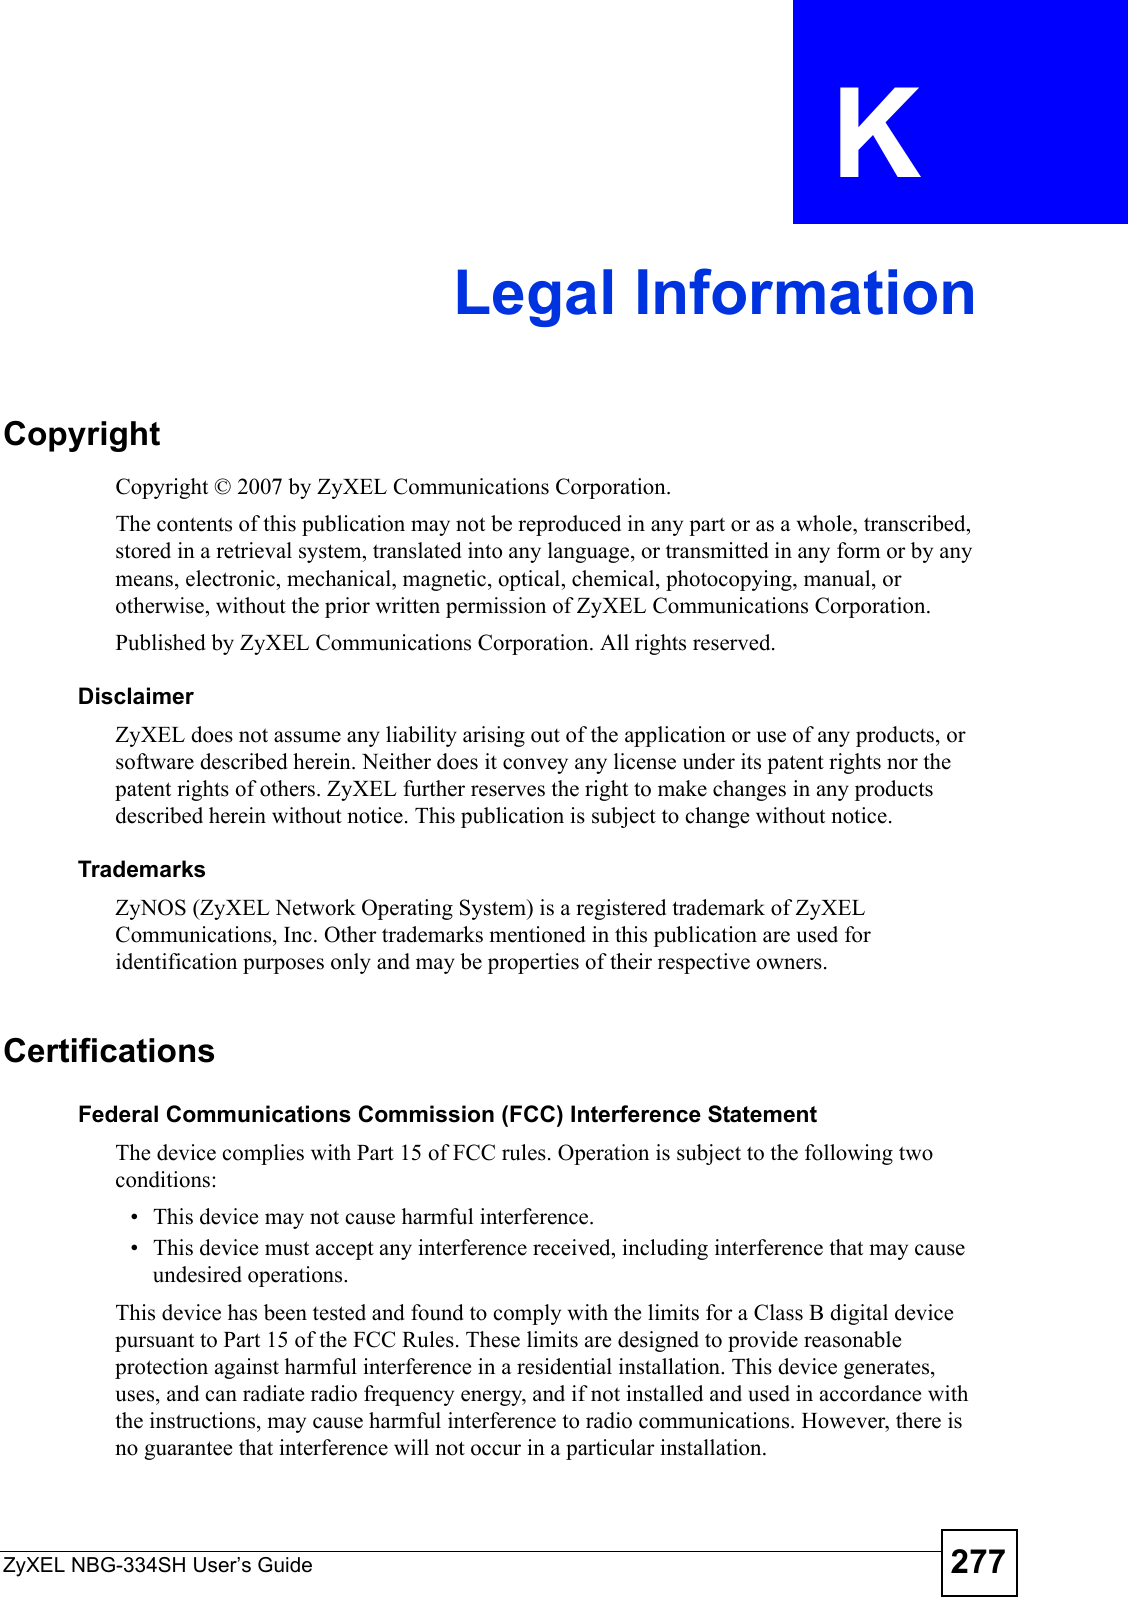 ZyXEL NBG-334SH User’s Guide 277APPENDIX  K Legal InformationCopyrightCopyright © 2007 by ZyXEL Communications Corporation.The contents of this publication may not be reproduced in any part or as a whole, transcribed, stored in a retrieval system, translated into any language, or transmitted in any form or by any means, electronic, mechanical, magnetic, optical, chemical, photocopying, manual, or otherwise, without the prior written permission of ZyXEL Communications Corporation.Published by ZyXEL Communications Corporation. All rights reserved.DisclaimerZyXEL does not assume any liability arising out of the application or use of any products, or software described herein. Neither does it convey any license under its patent rights nor the patent rights of others. ZyXEL further reserves the right to make changes in any products described herein without notice. This publication is subject to change without notice.TrademarksZyNOS (ZyXEL Network Operating System) is a registered trademark of ZyXEL Communications, Inc. Other trademarks mentioned in this publication are used for identification purposes only and may be properties of their respective owners.Certifications Federal Communications Commission (FCC) Interference StatementThe device complies with Part 15 of FCC rules. Operation is subject to the following two conditions:• This device may not cause harmful interference.• This device must accept any interference received, including interference that may cause undesired operations.This device has been tested and found to comply with the limits for a Class B digital device pursuant to Part 15 of the FCC Rules. These limits are designed to provide reasonable protection against harmful interference in a residential installation. This device generates, uses, and can radiate radio frequency energy, and if not installed and used in accordance with the instructions, may cause harmful interference to radio communications. However, there is no guarantee that interference will not occur in a particular installation.